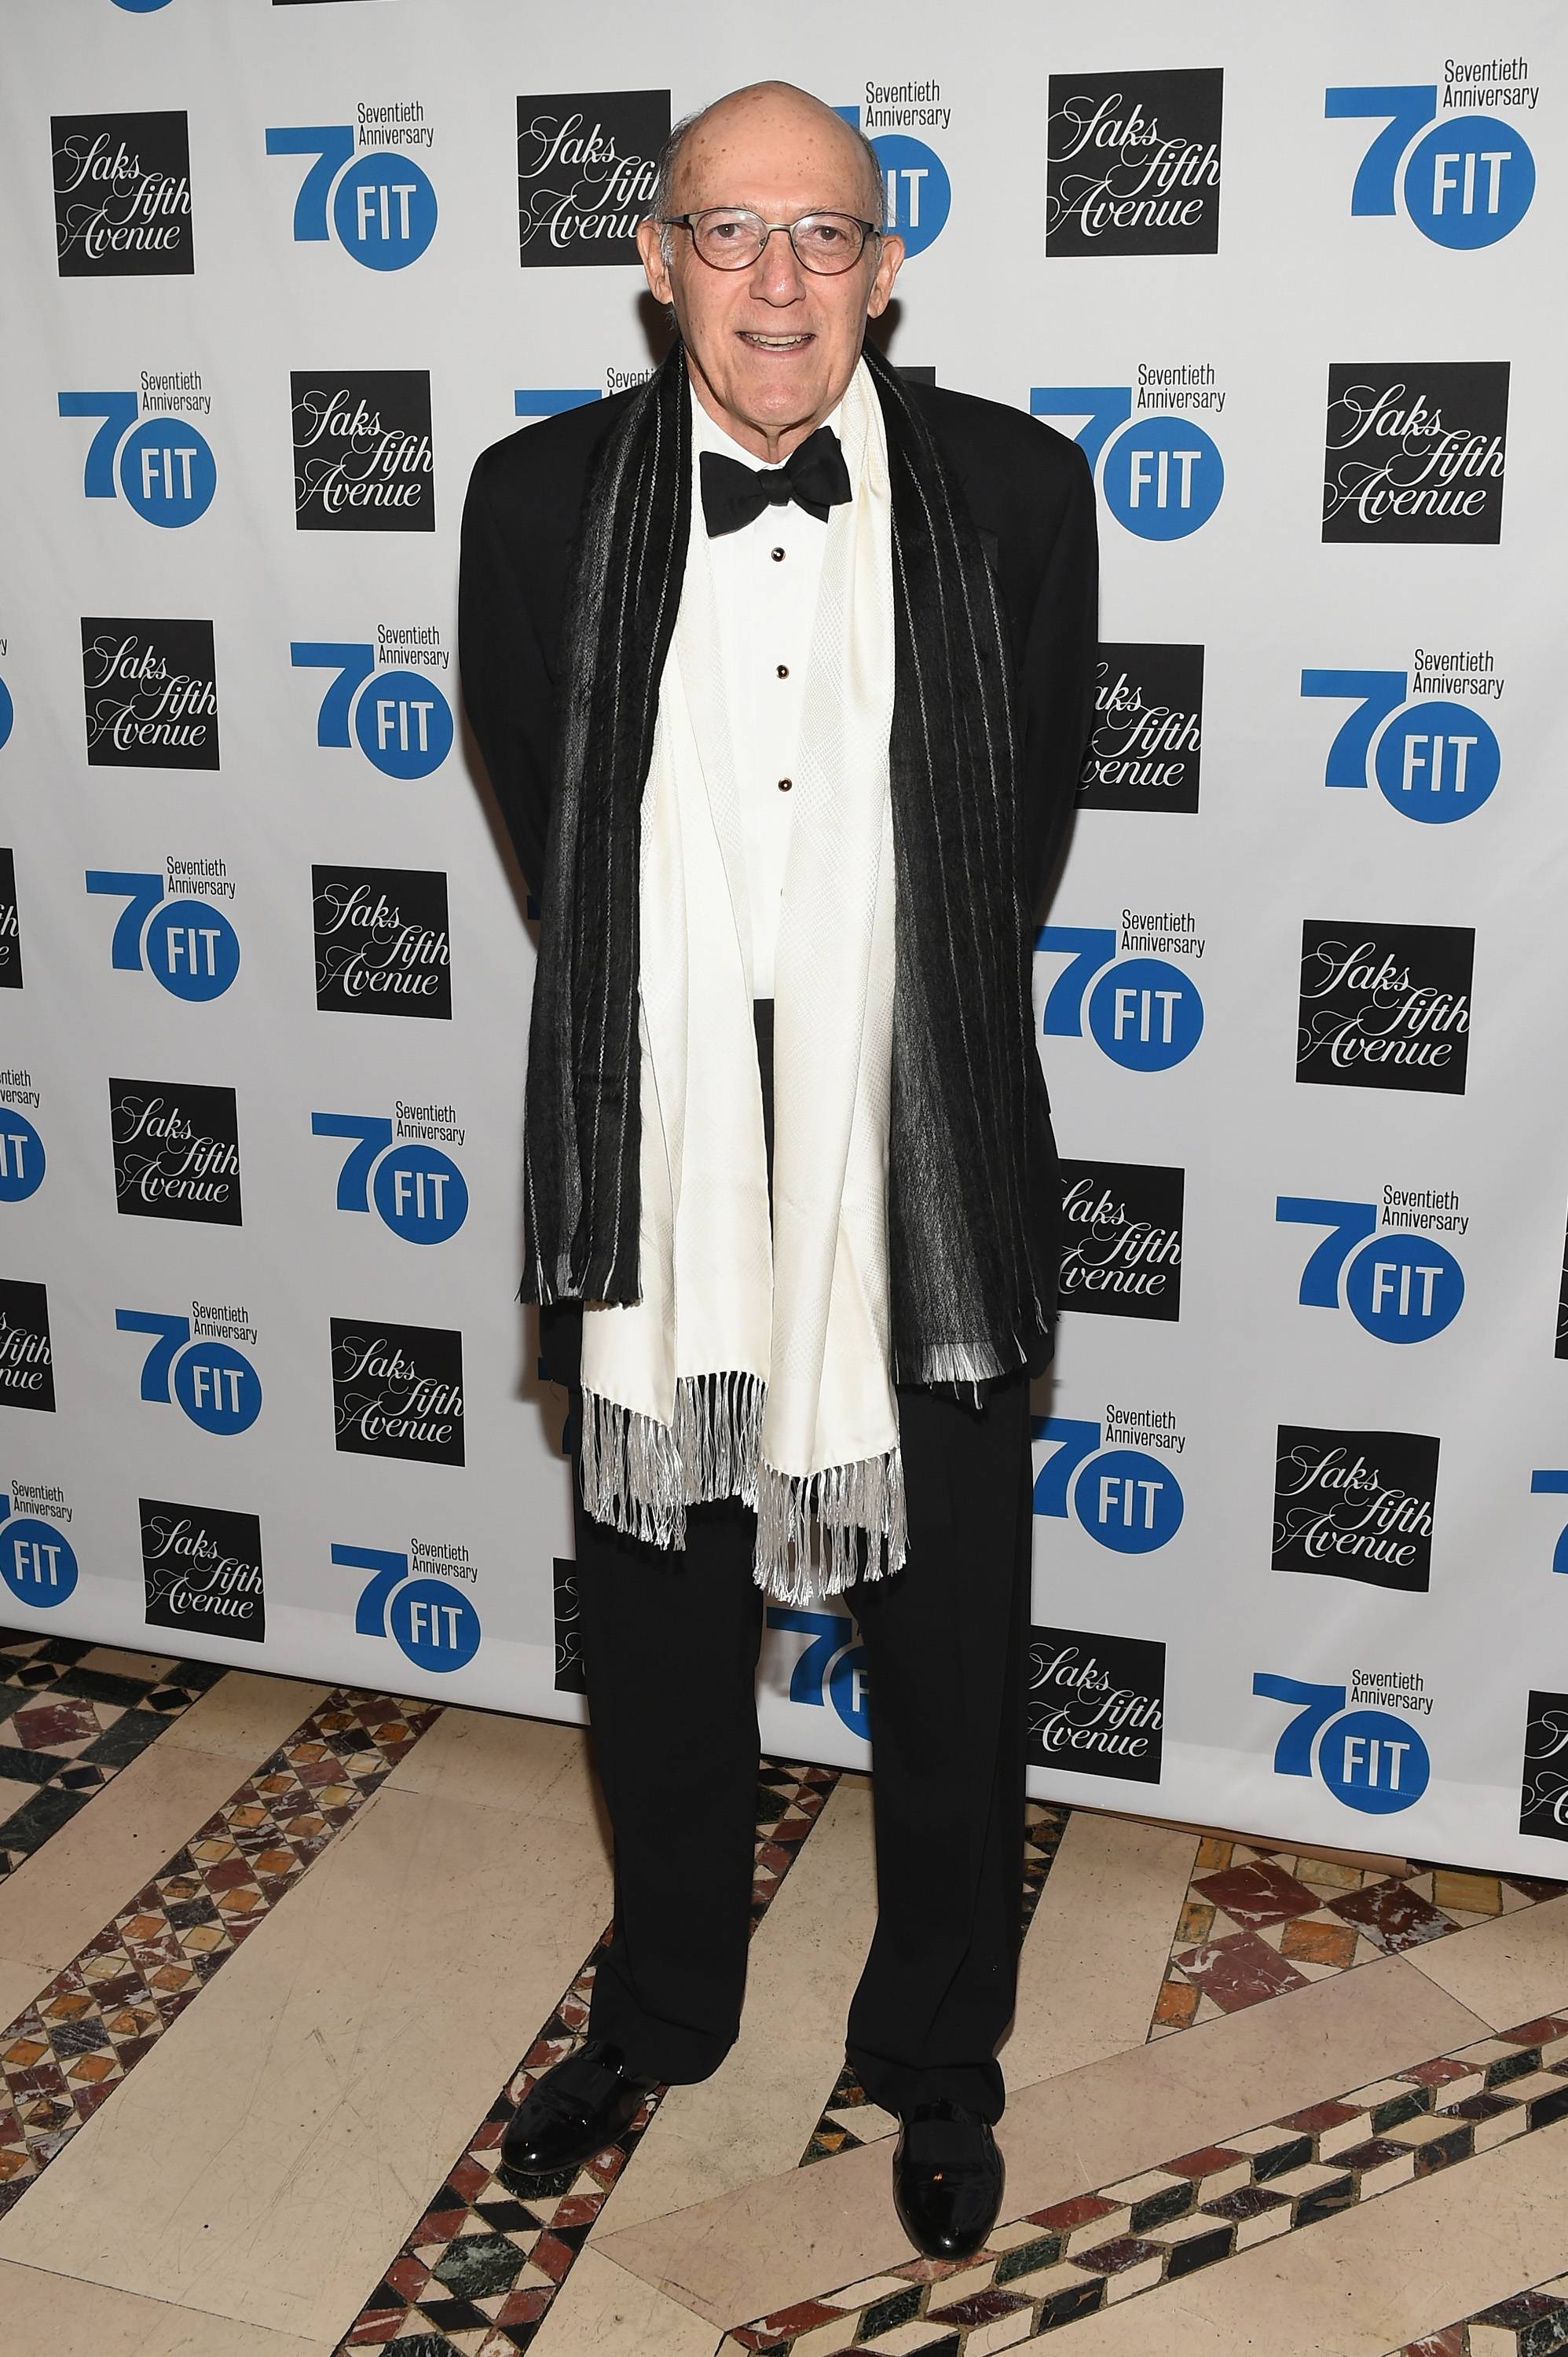 NEW YORK, NY - JUNE 15:  Honoree Edwin A. Goodman attends the FIT Foundation Gala hosted by Debi Mazar on June 15, 2015 in New York City.  (Photo by Andrew H. Walker/Getty Images for FIT)